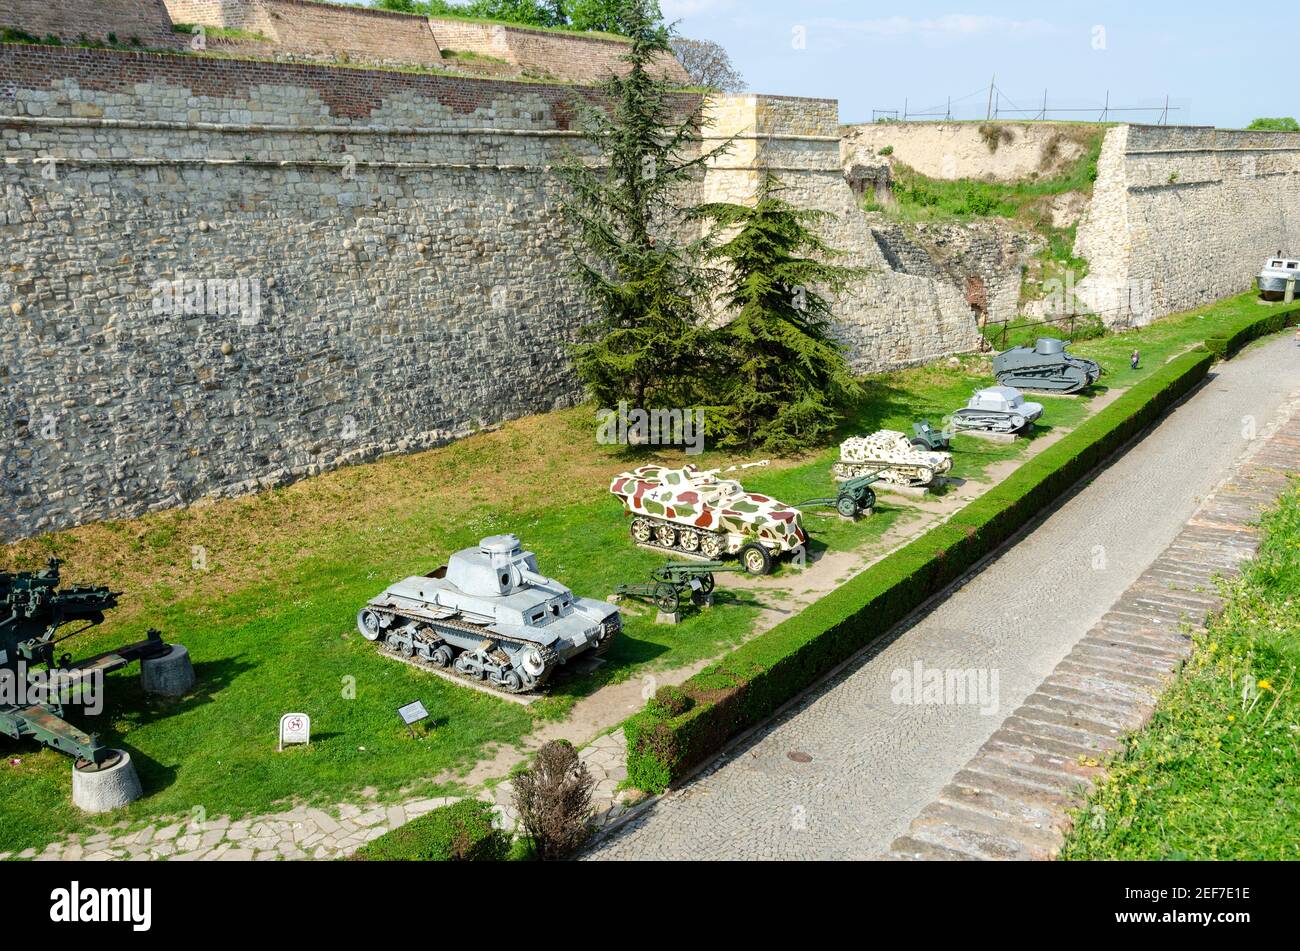 Exhibition of tanks in Kalemegdan - The Belgrade Fortress and Park of the same name in Belgrade, Serbia. Stock Photo